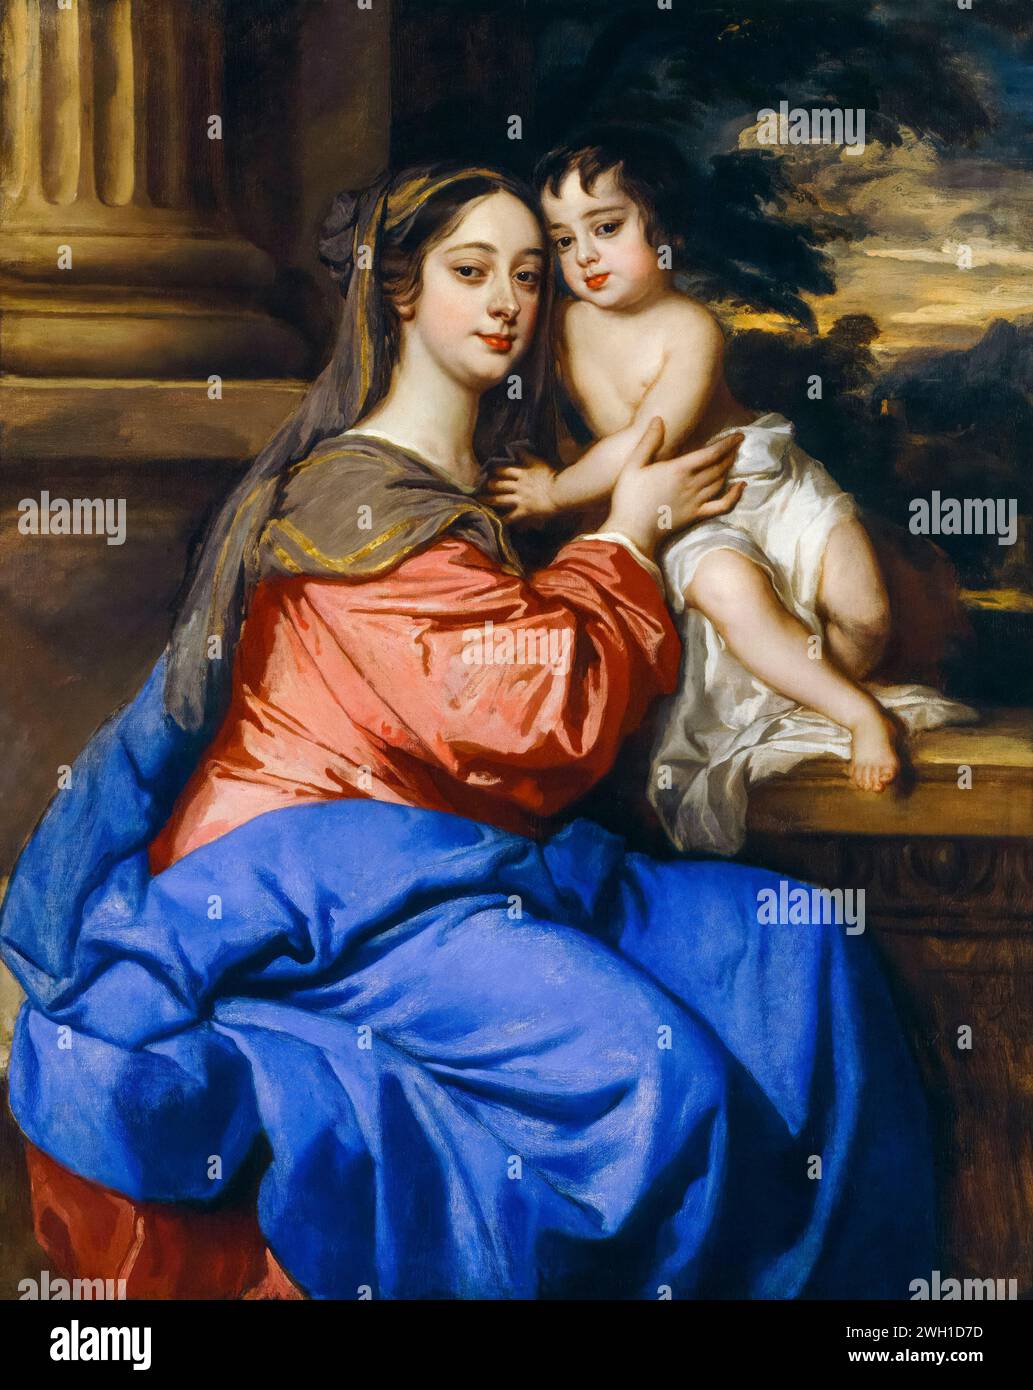 Barbara Palmer, 1st Duchess of Cleveland (née Barbara Villiers, 1640-1709), English royal mistress of King Charles II of England, with her son Charles FitzRoy (1662-1730), later 2nd Duke of Cleveland, as the Virgin and Child, portrait painting in oil on canvas by Sir Peter Lely, circa 1664 Stock Photo